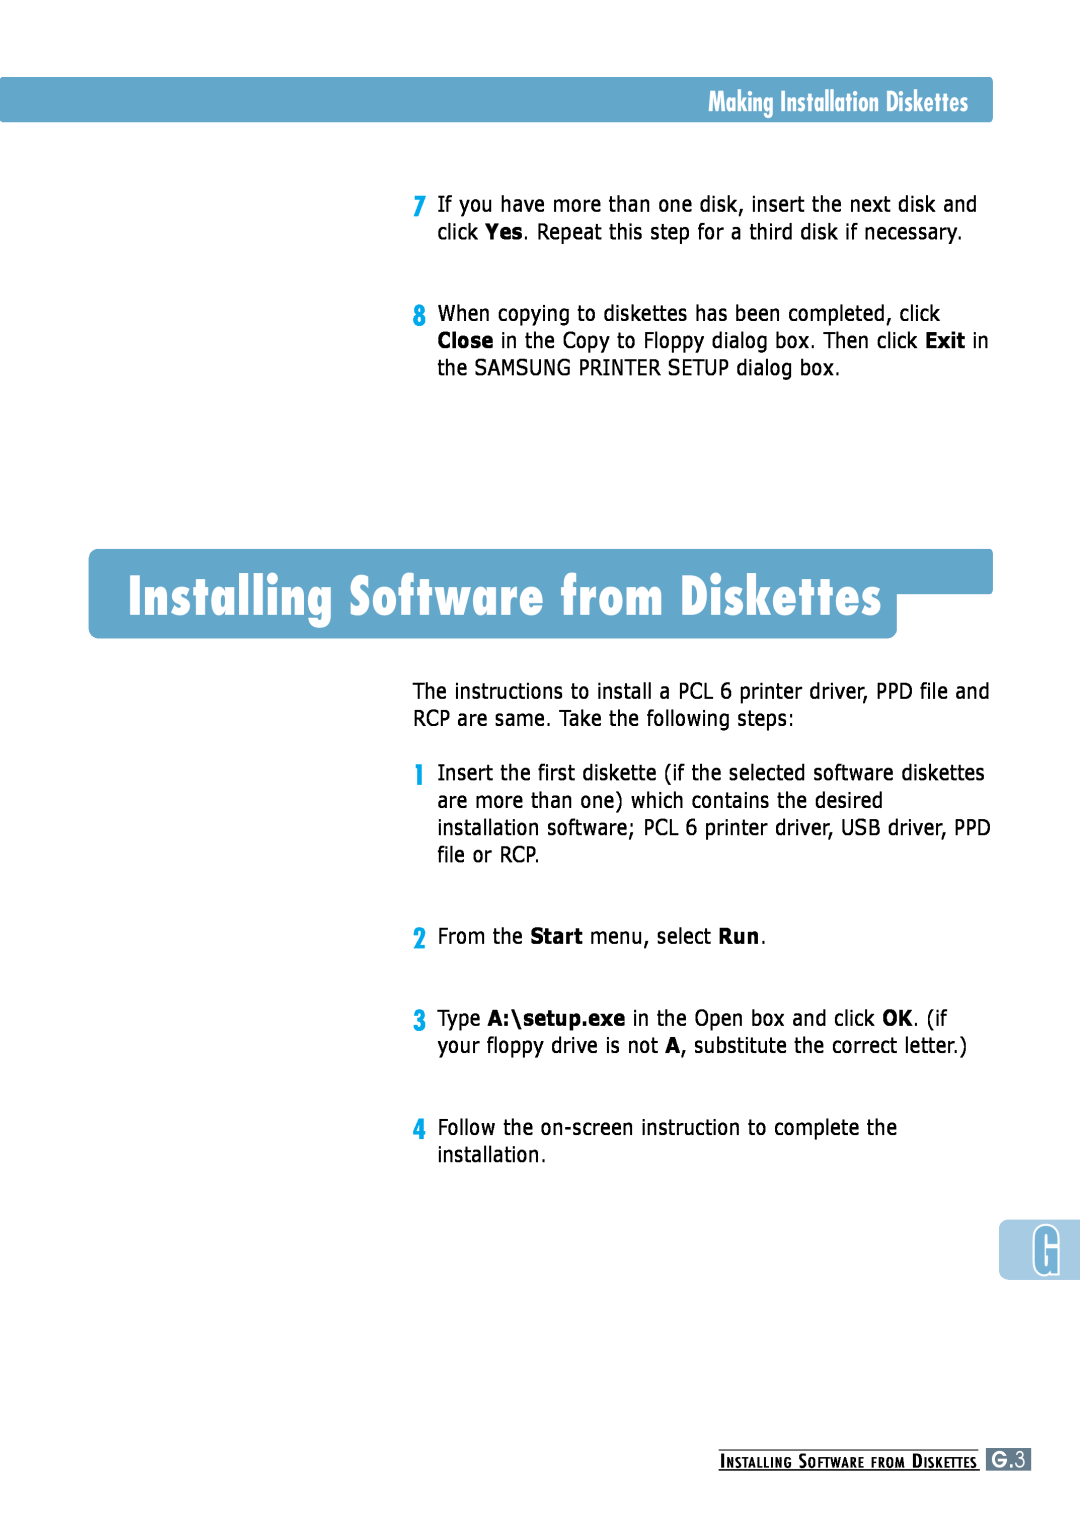 Samsung ML-6060S, ML-6060N manual Installing Software from Diskettes, Making Installation Diskettes 